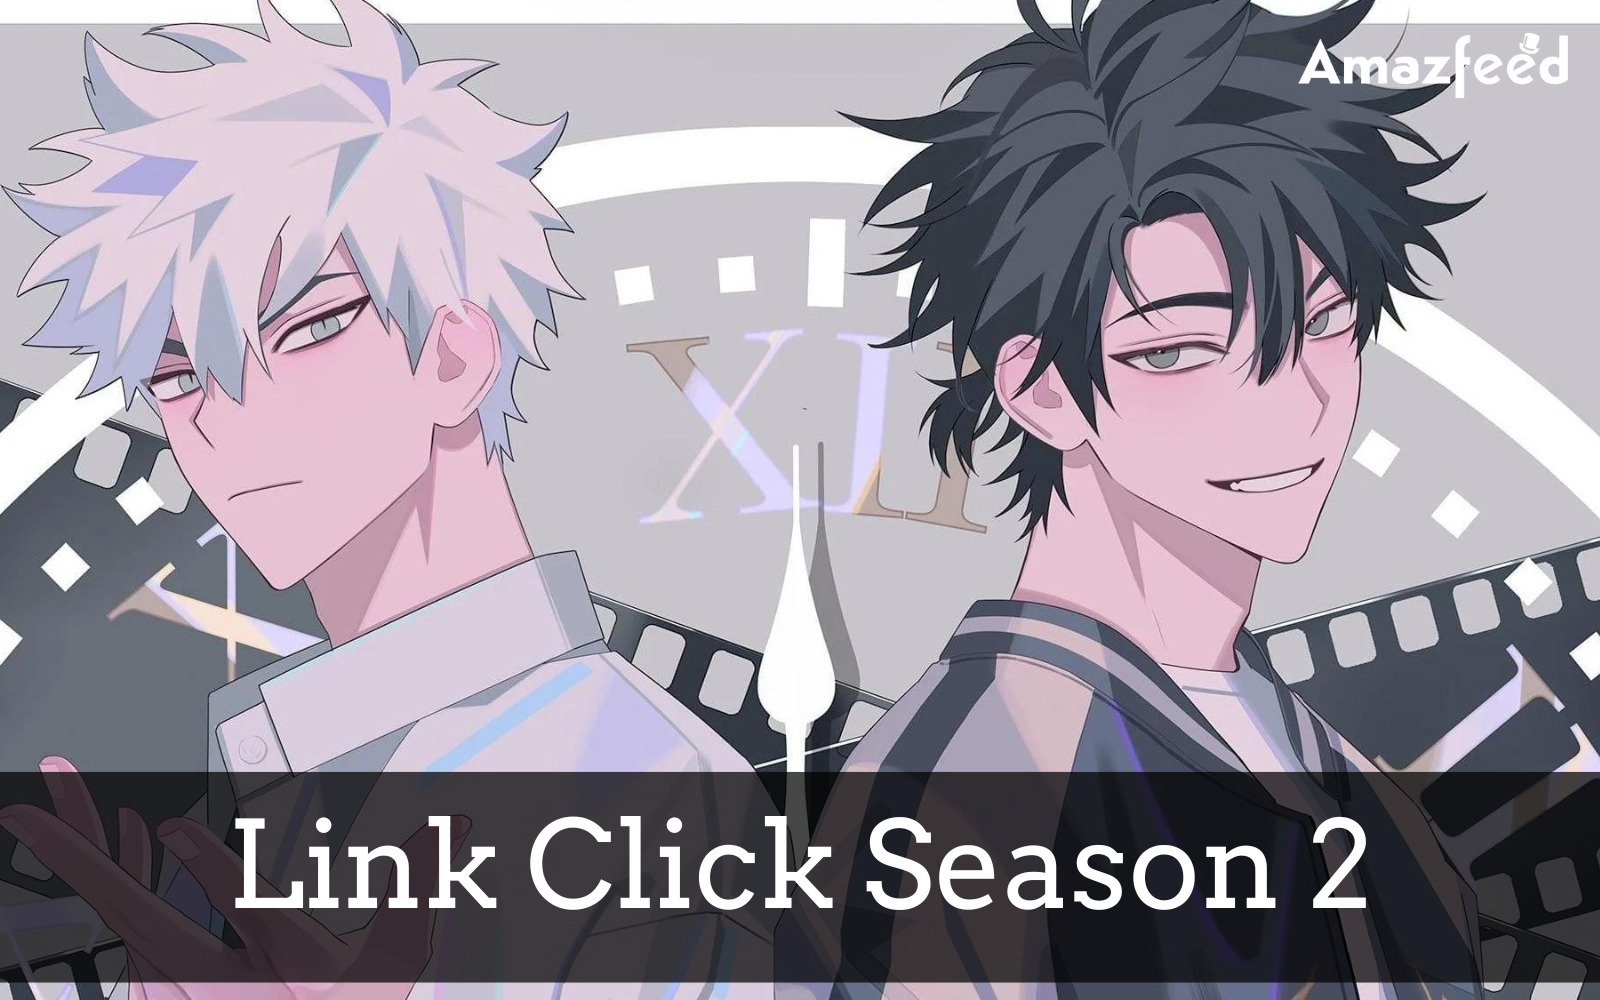 Who Will Be Part Of Link Click Season 2 (Voice cast)